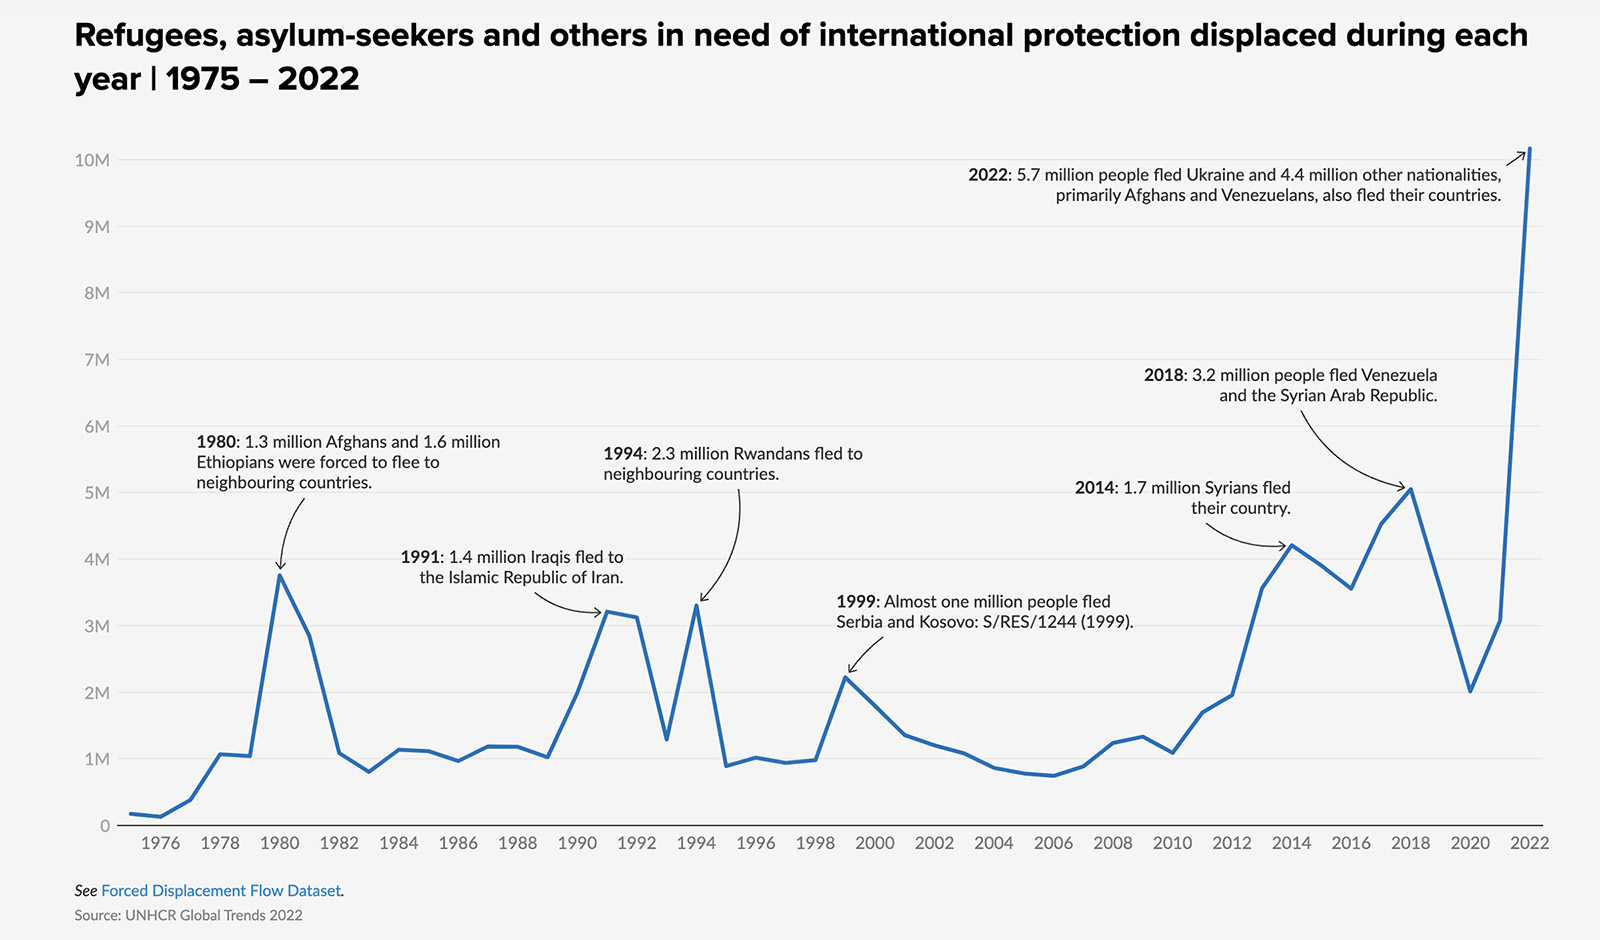 "Refugees, asylum-seekers and others in need of international protection displaced during each year | 1975 – 2022" (Graphic courtesy UNHCR)